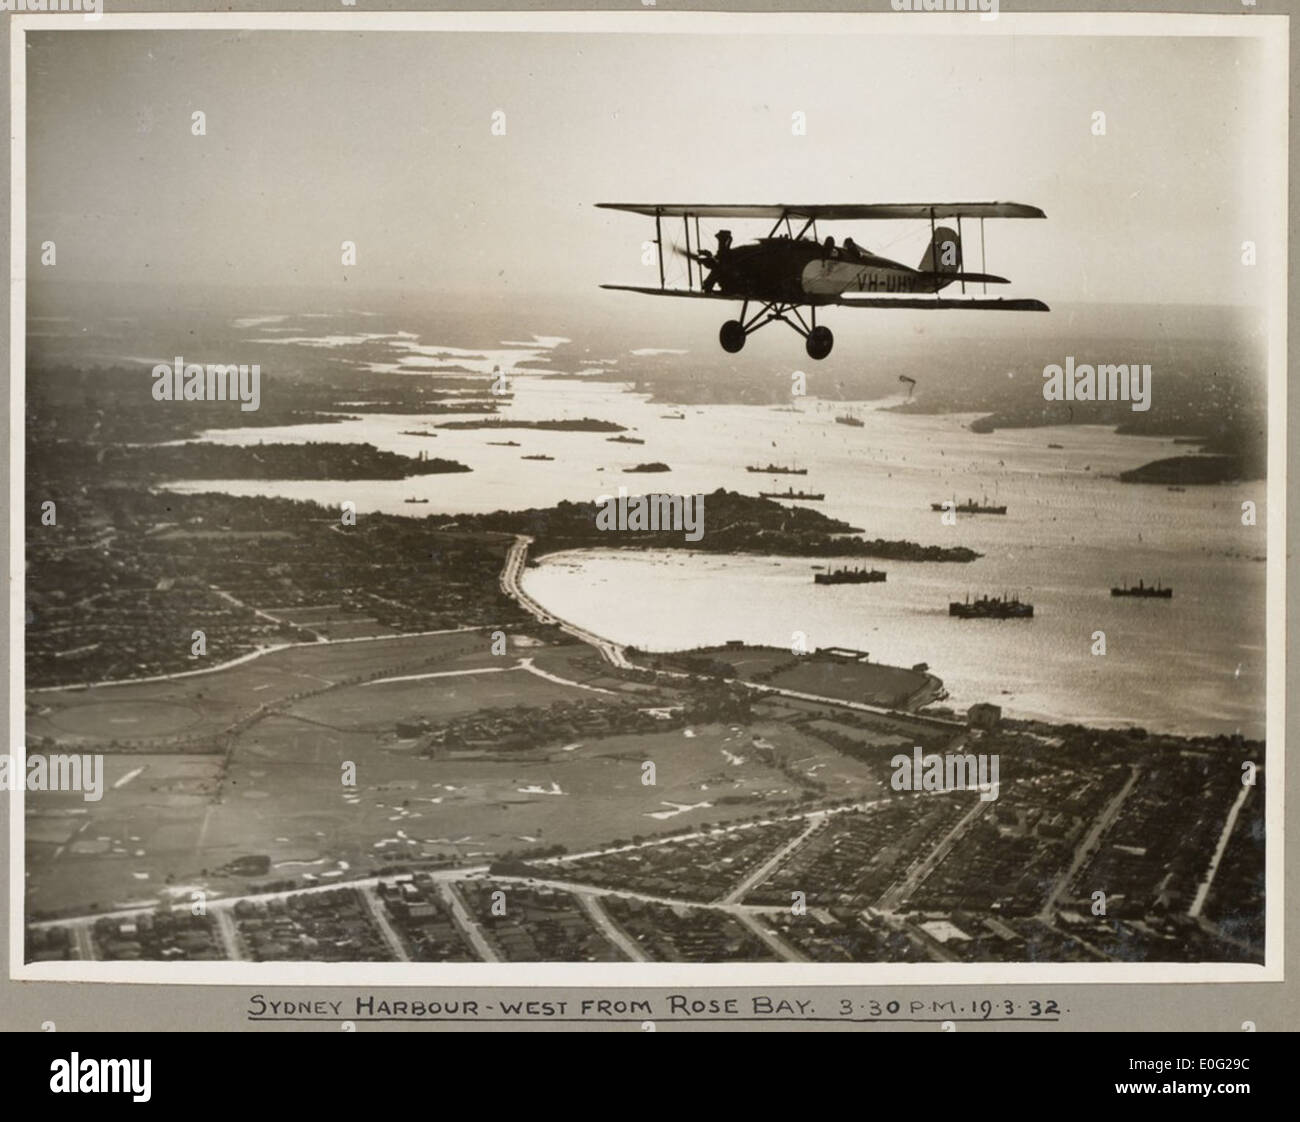 American Eagle model A-1 biplane VH-UHV in flight above Sydney Harbour, 19 March 1932 Stock Photo